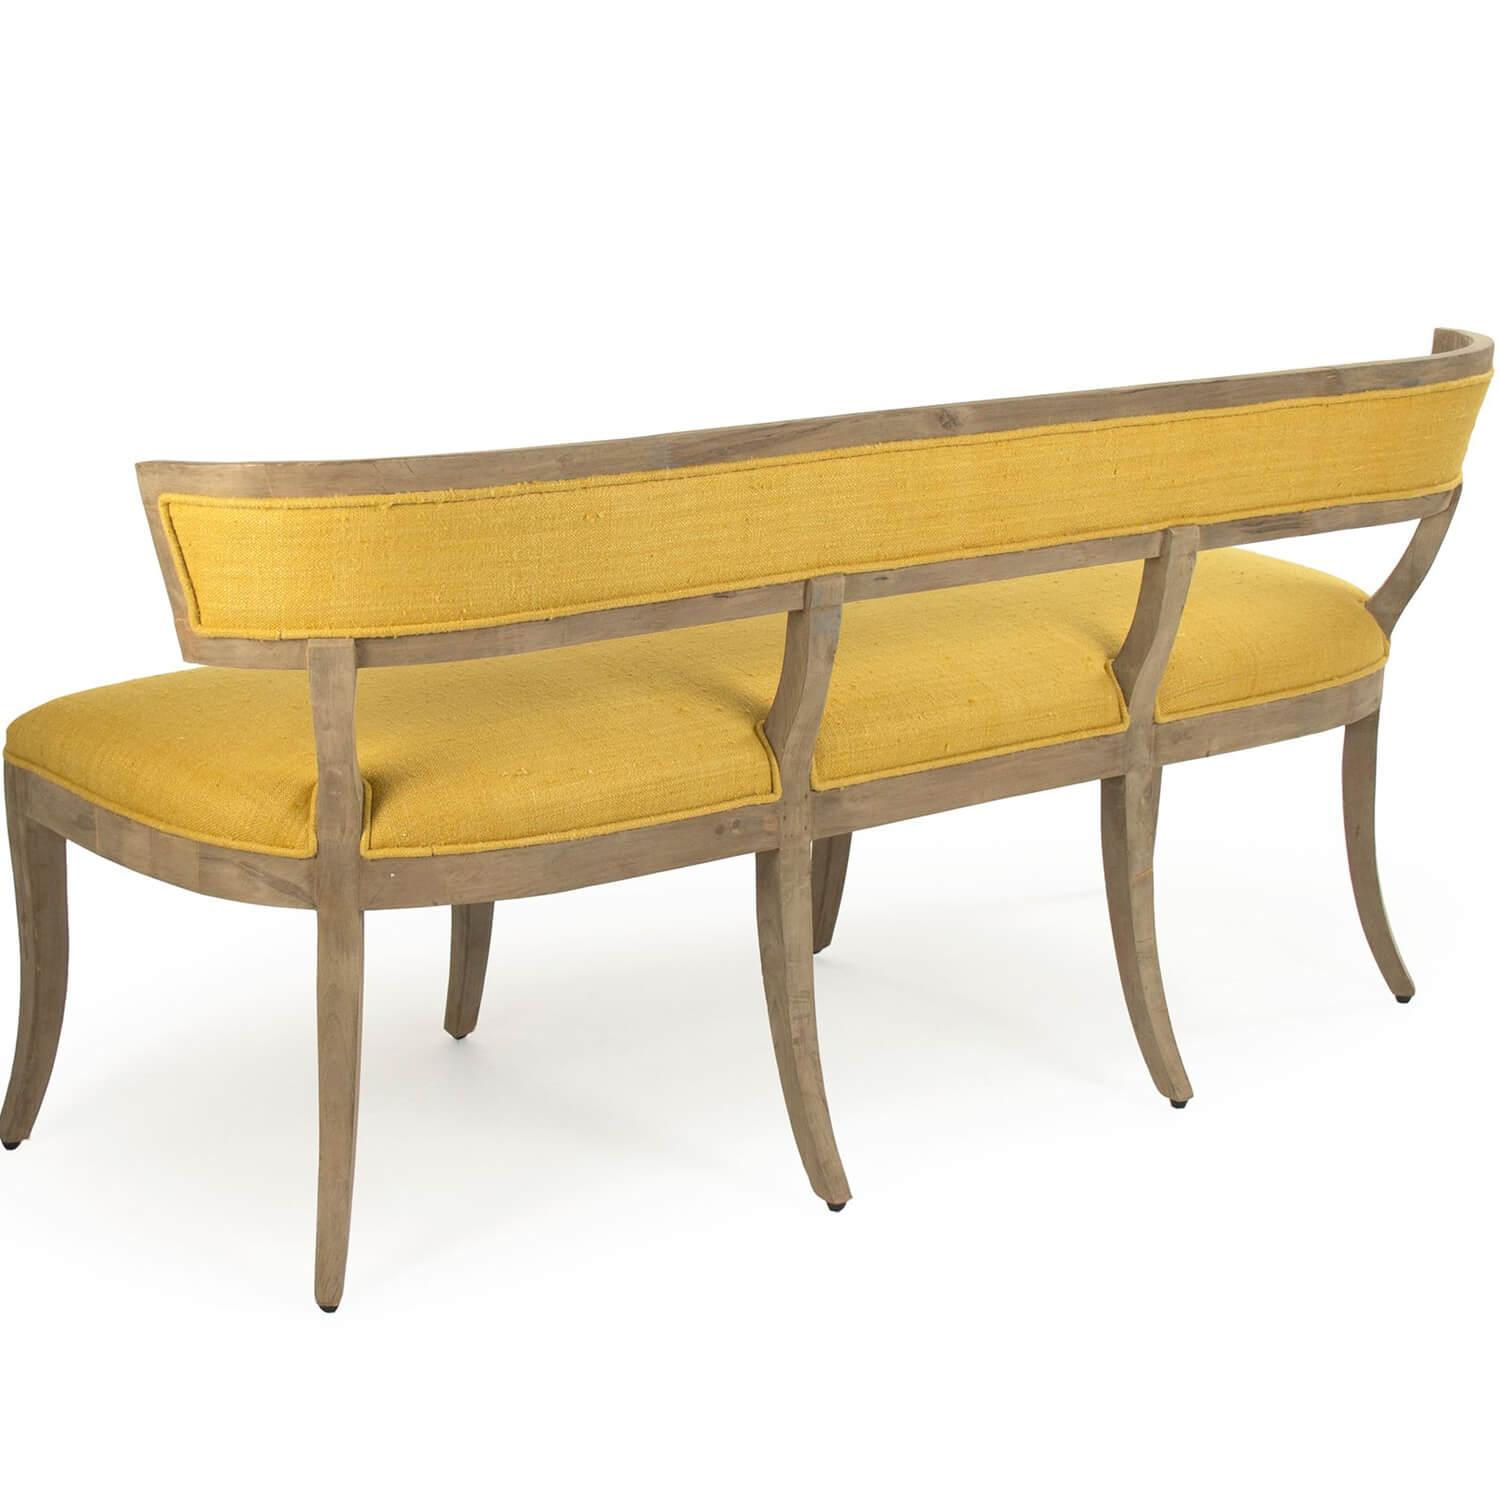 Sunflower Curved Bench - Belle Escape